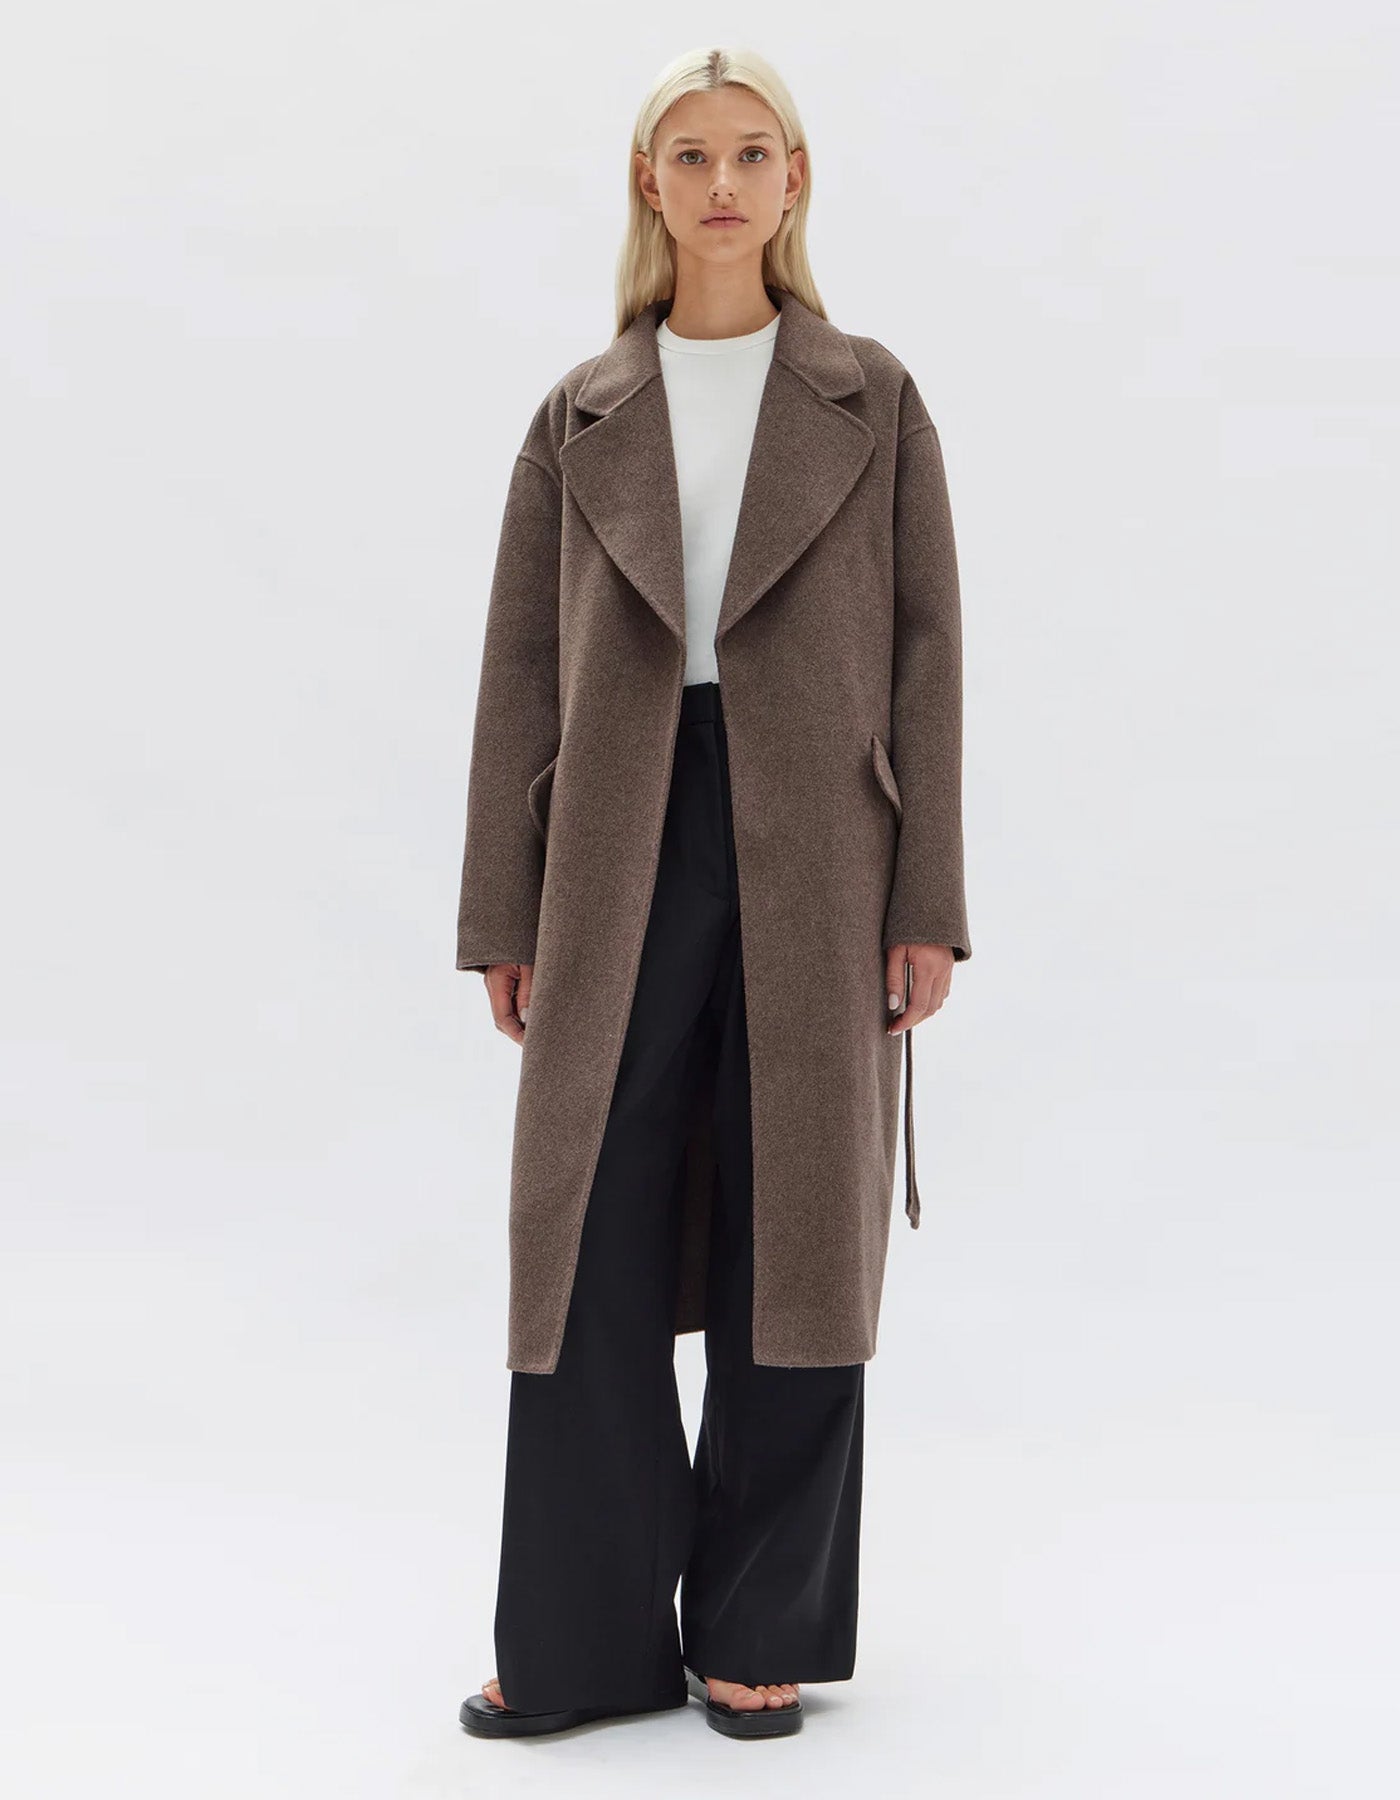 Assembly Label Sadie Single Breasted Wool Coat Cocoa Marle